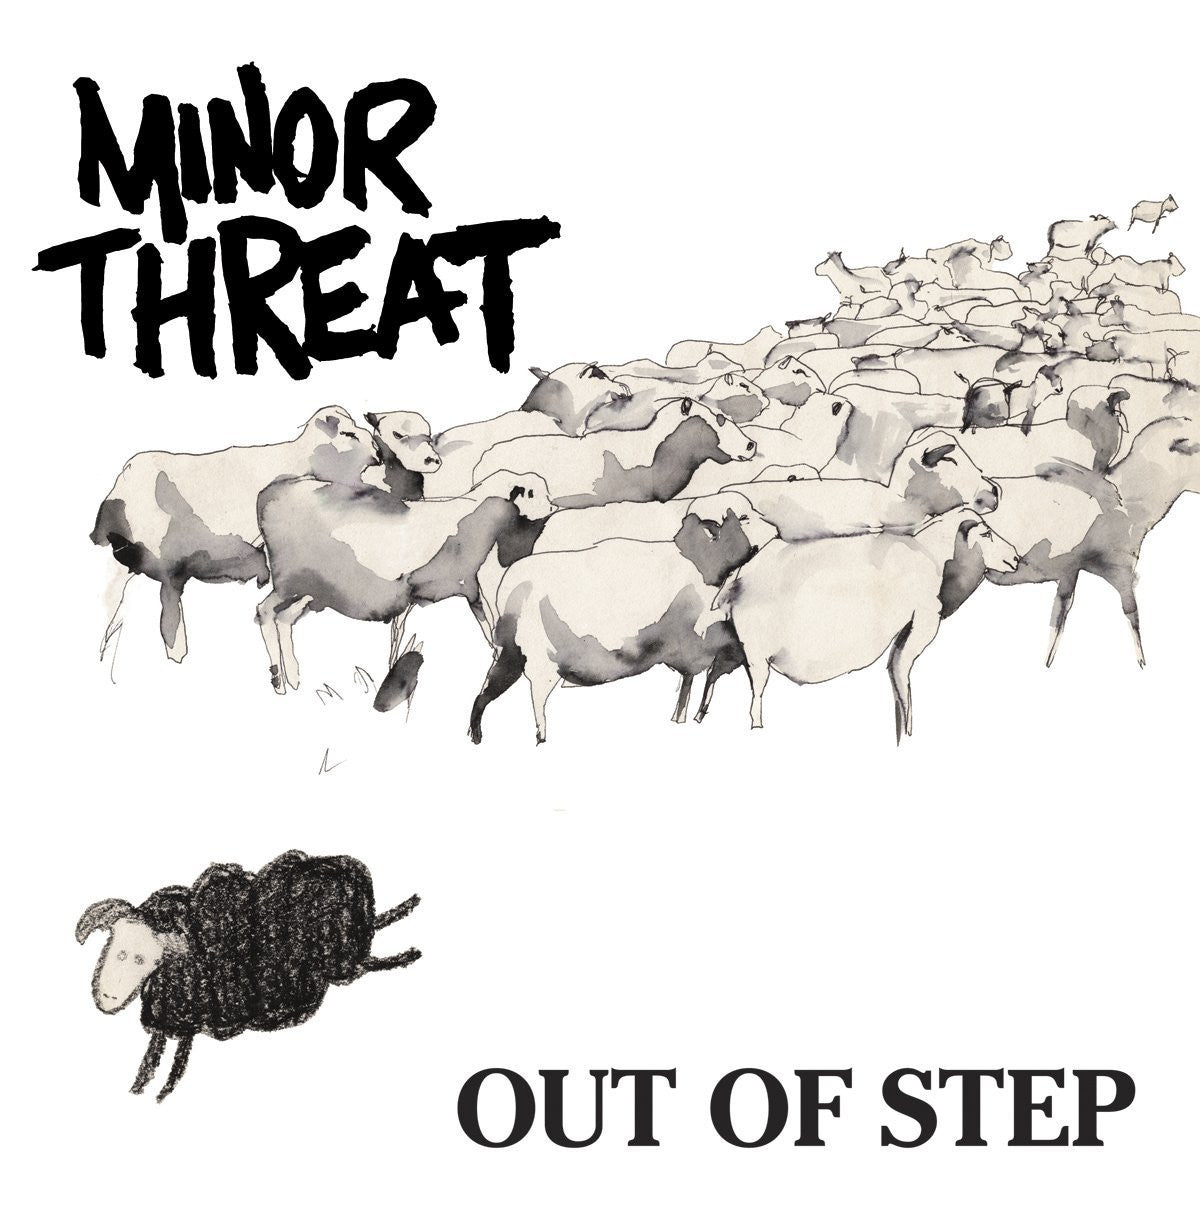 Minor Threat - Out of Step EP